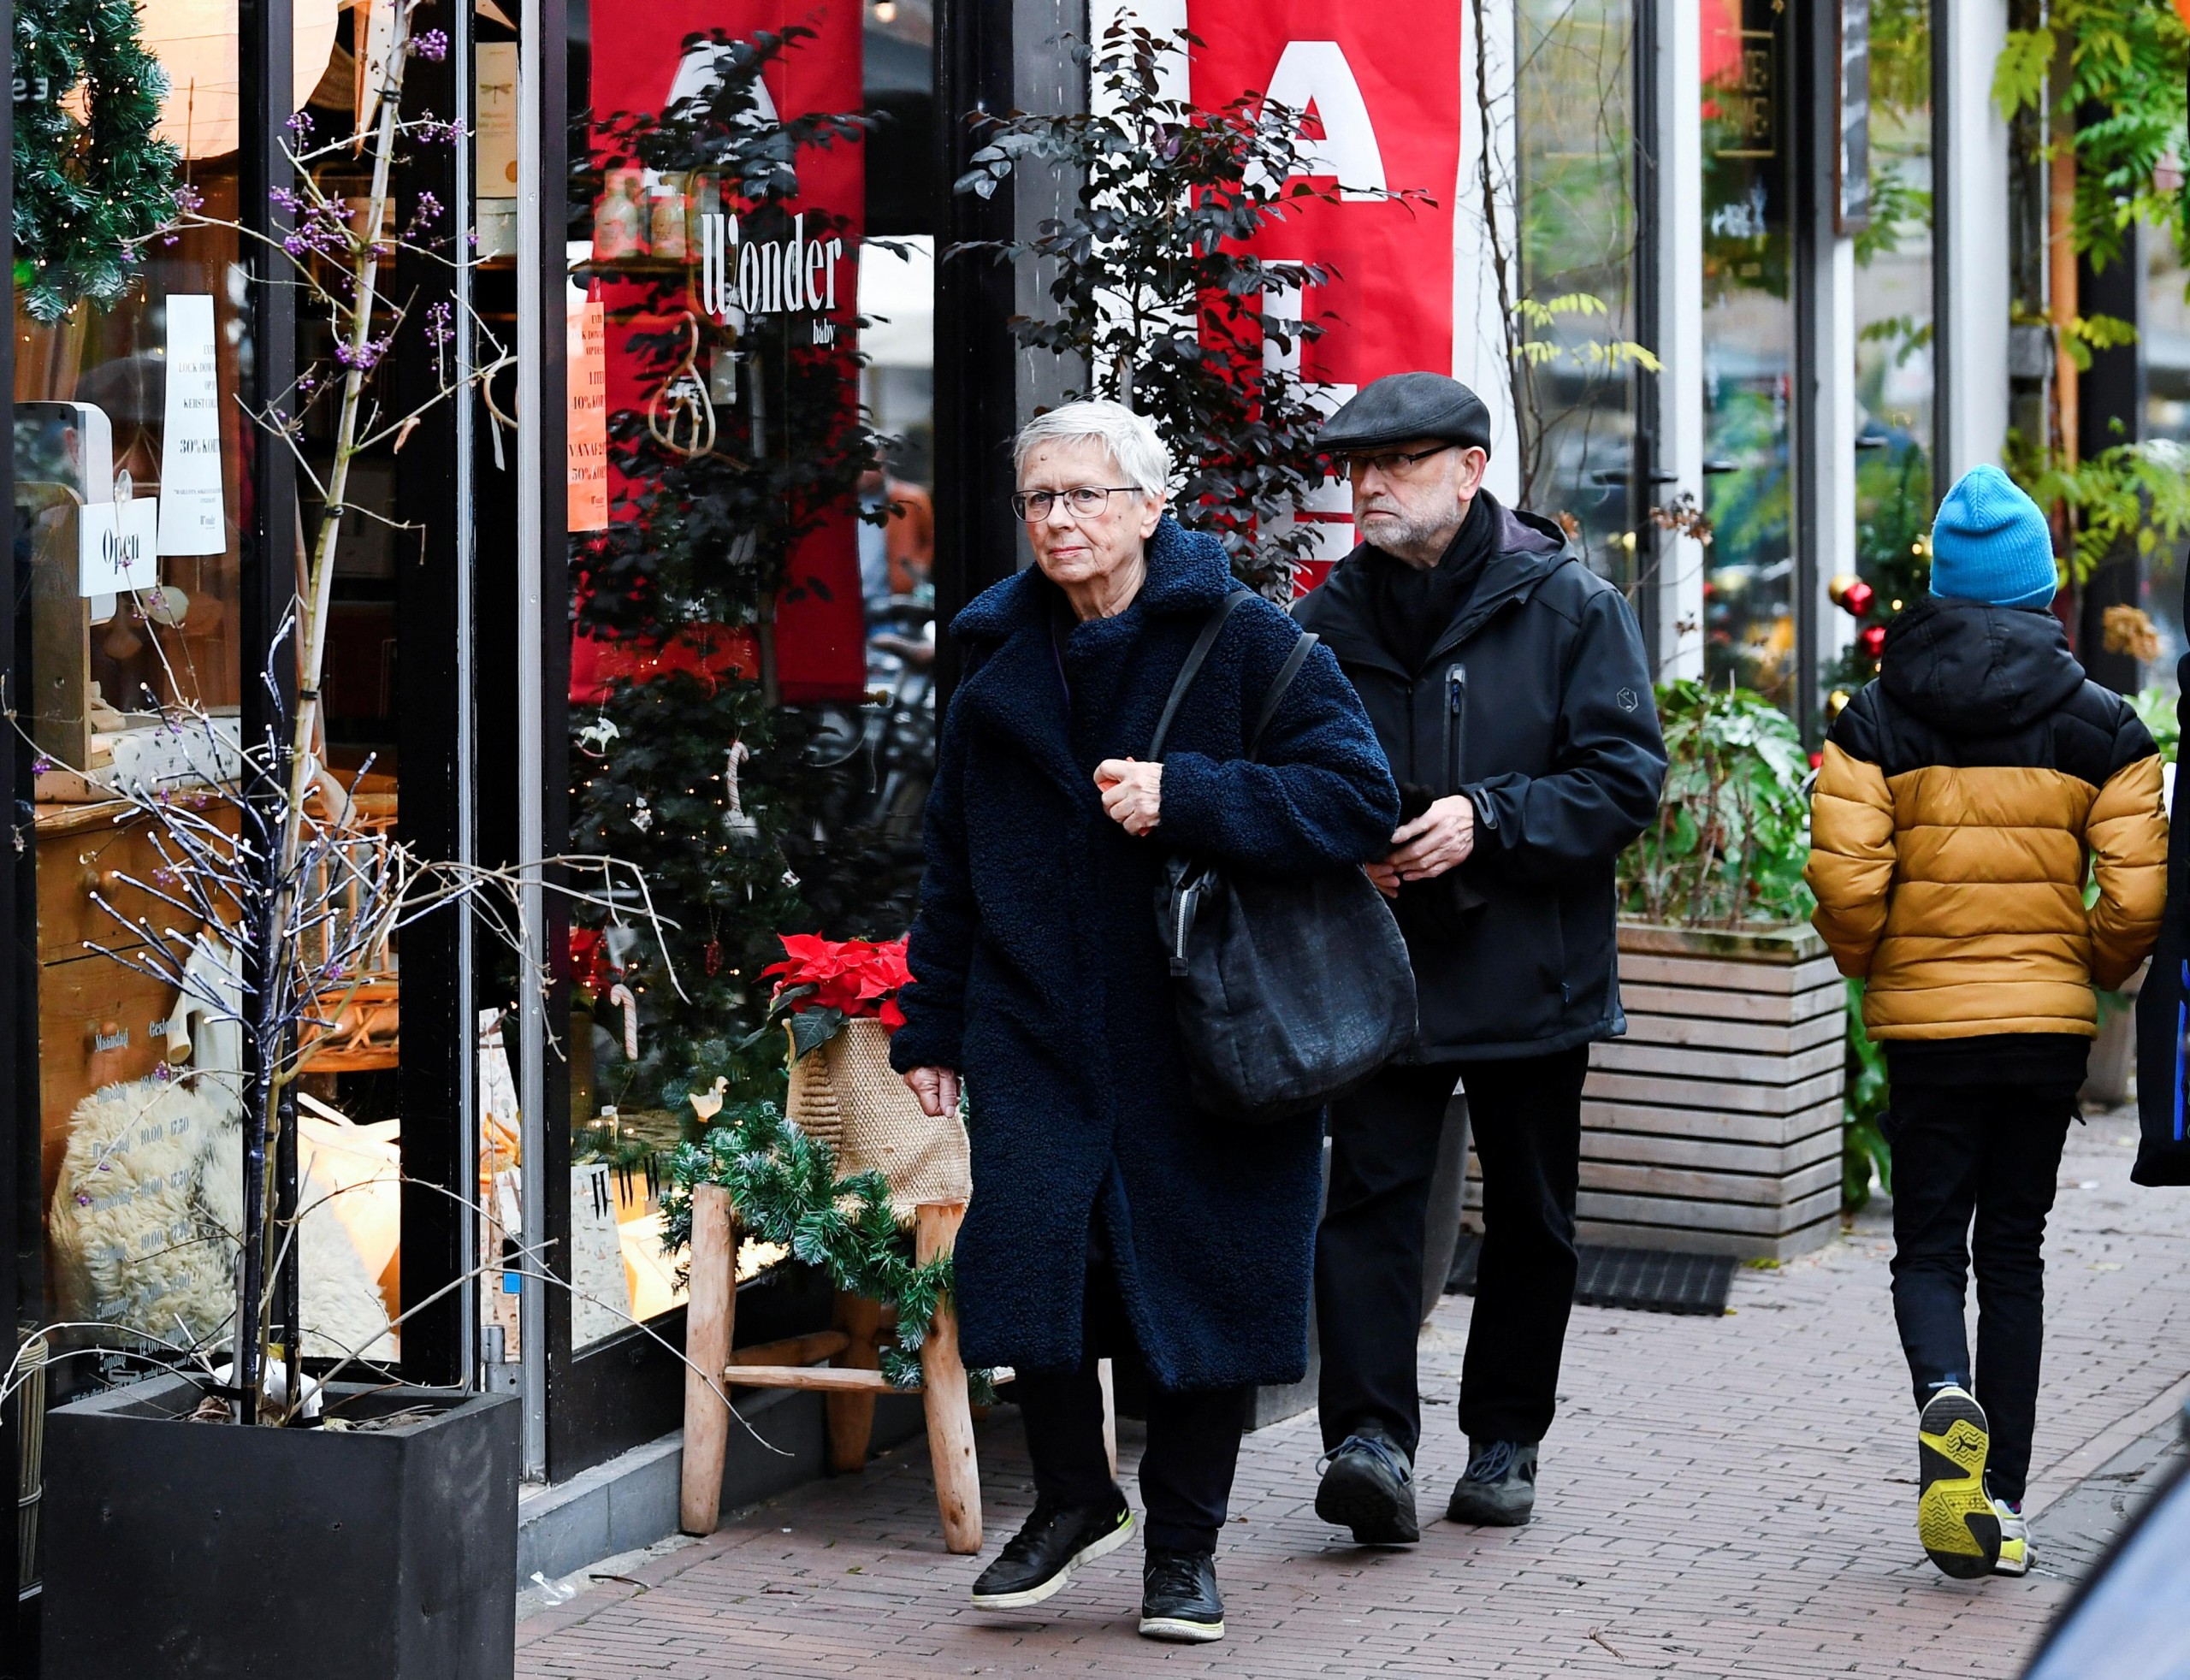 People do their Christmas shopping before the Dutch government's expected announcement of a "strict" Christmas lockdown to curb the spread of the Omicron coronavirus variant, in the city centre of Nijmegen, Netherlands December 18, 2021. REUTERS/Piroschka van de Wouw